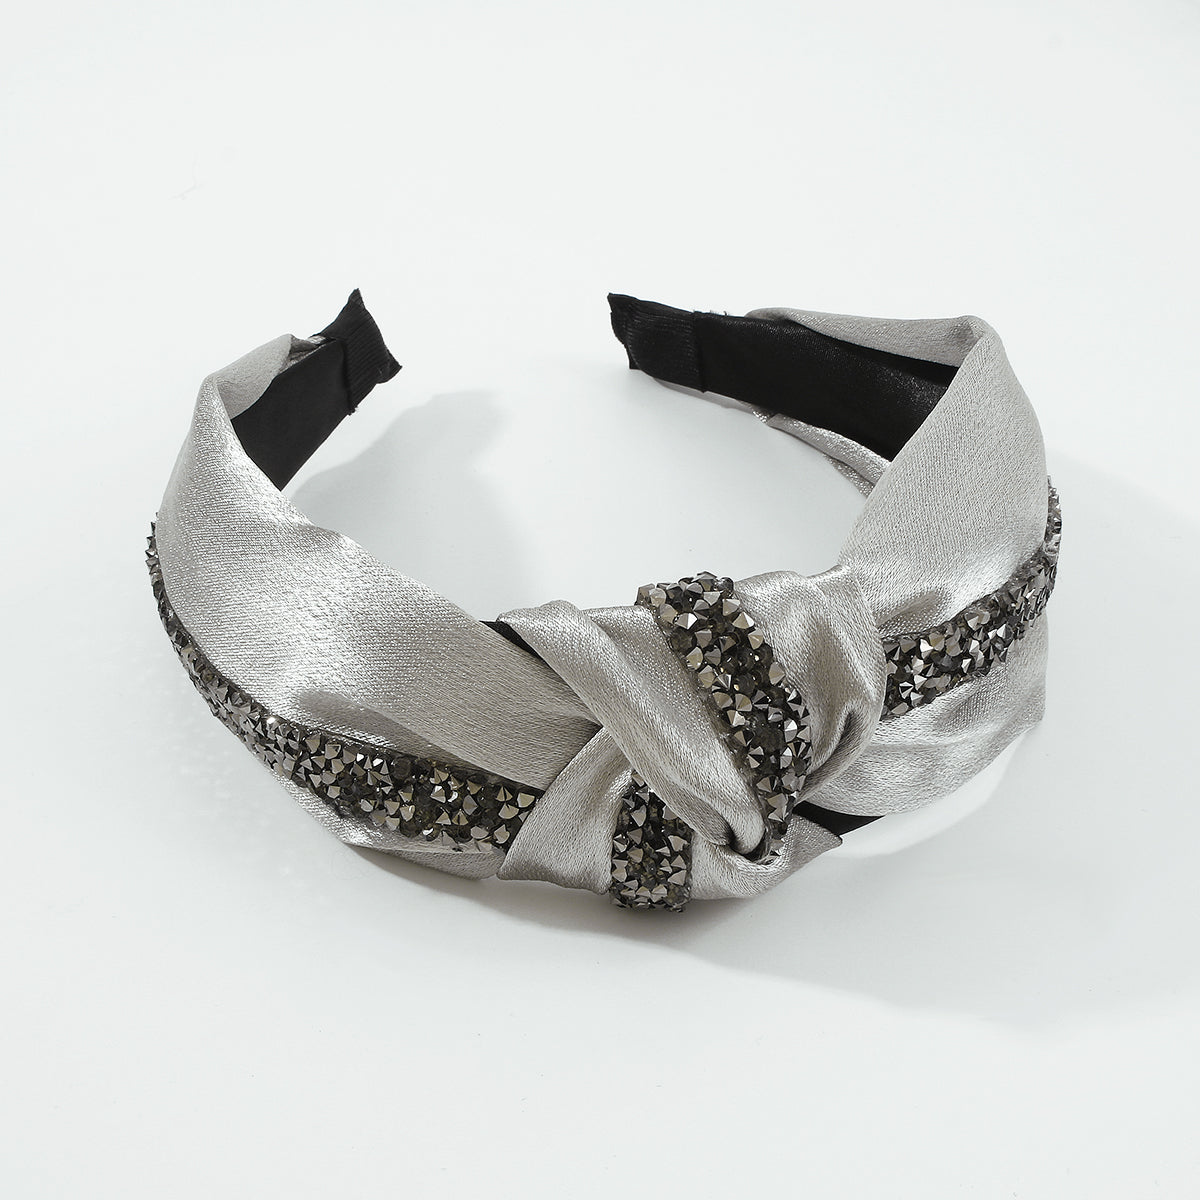 Satin Fabric Gray Color Cross Knotted Hairband medyjewelry